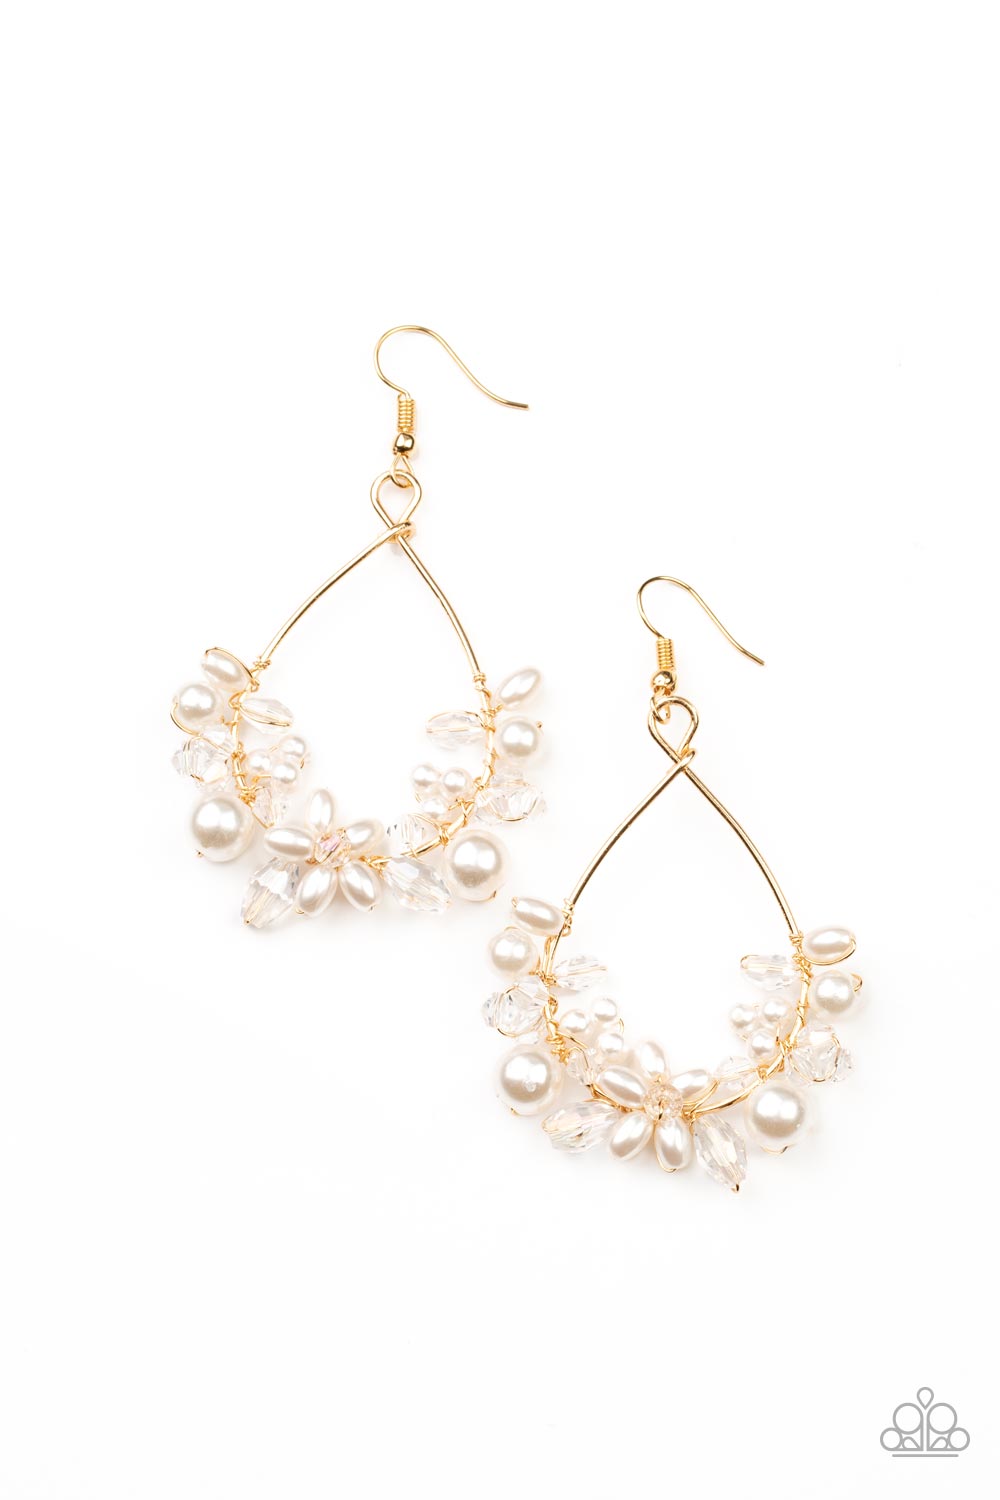 Marina Banquet Gold Earring - Paparazzi Accessories Item #P5RE-GDXX-234XX A bubbly collection of white pearls and white crystal-like beads are threaded along the bottom of a dainty gold wire hoop, creating twinkly floral accents. Earring attaches to a standard fishhook fitting.  Sold as one pair of earrings.